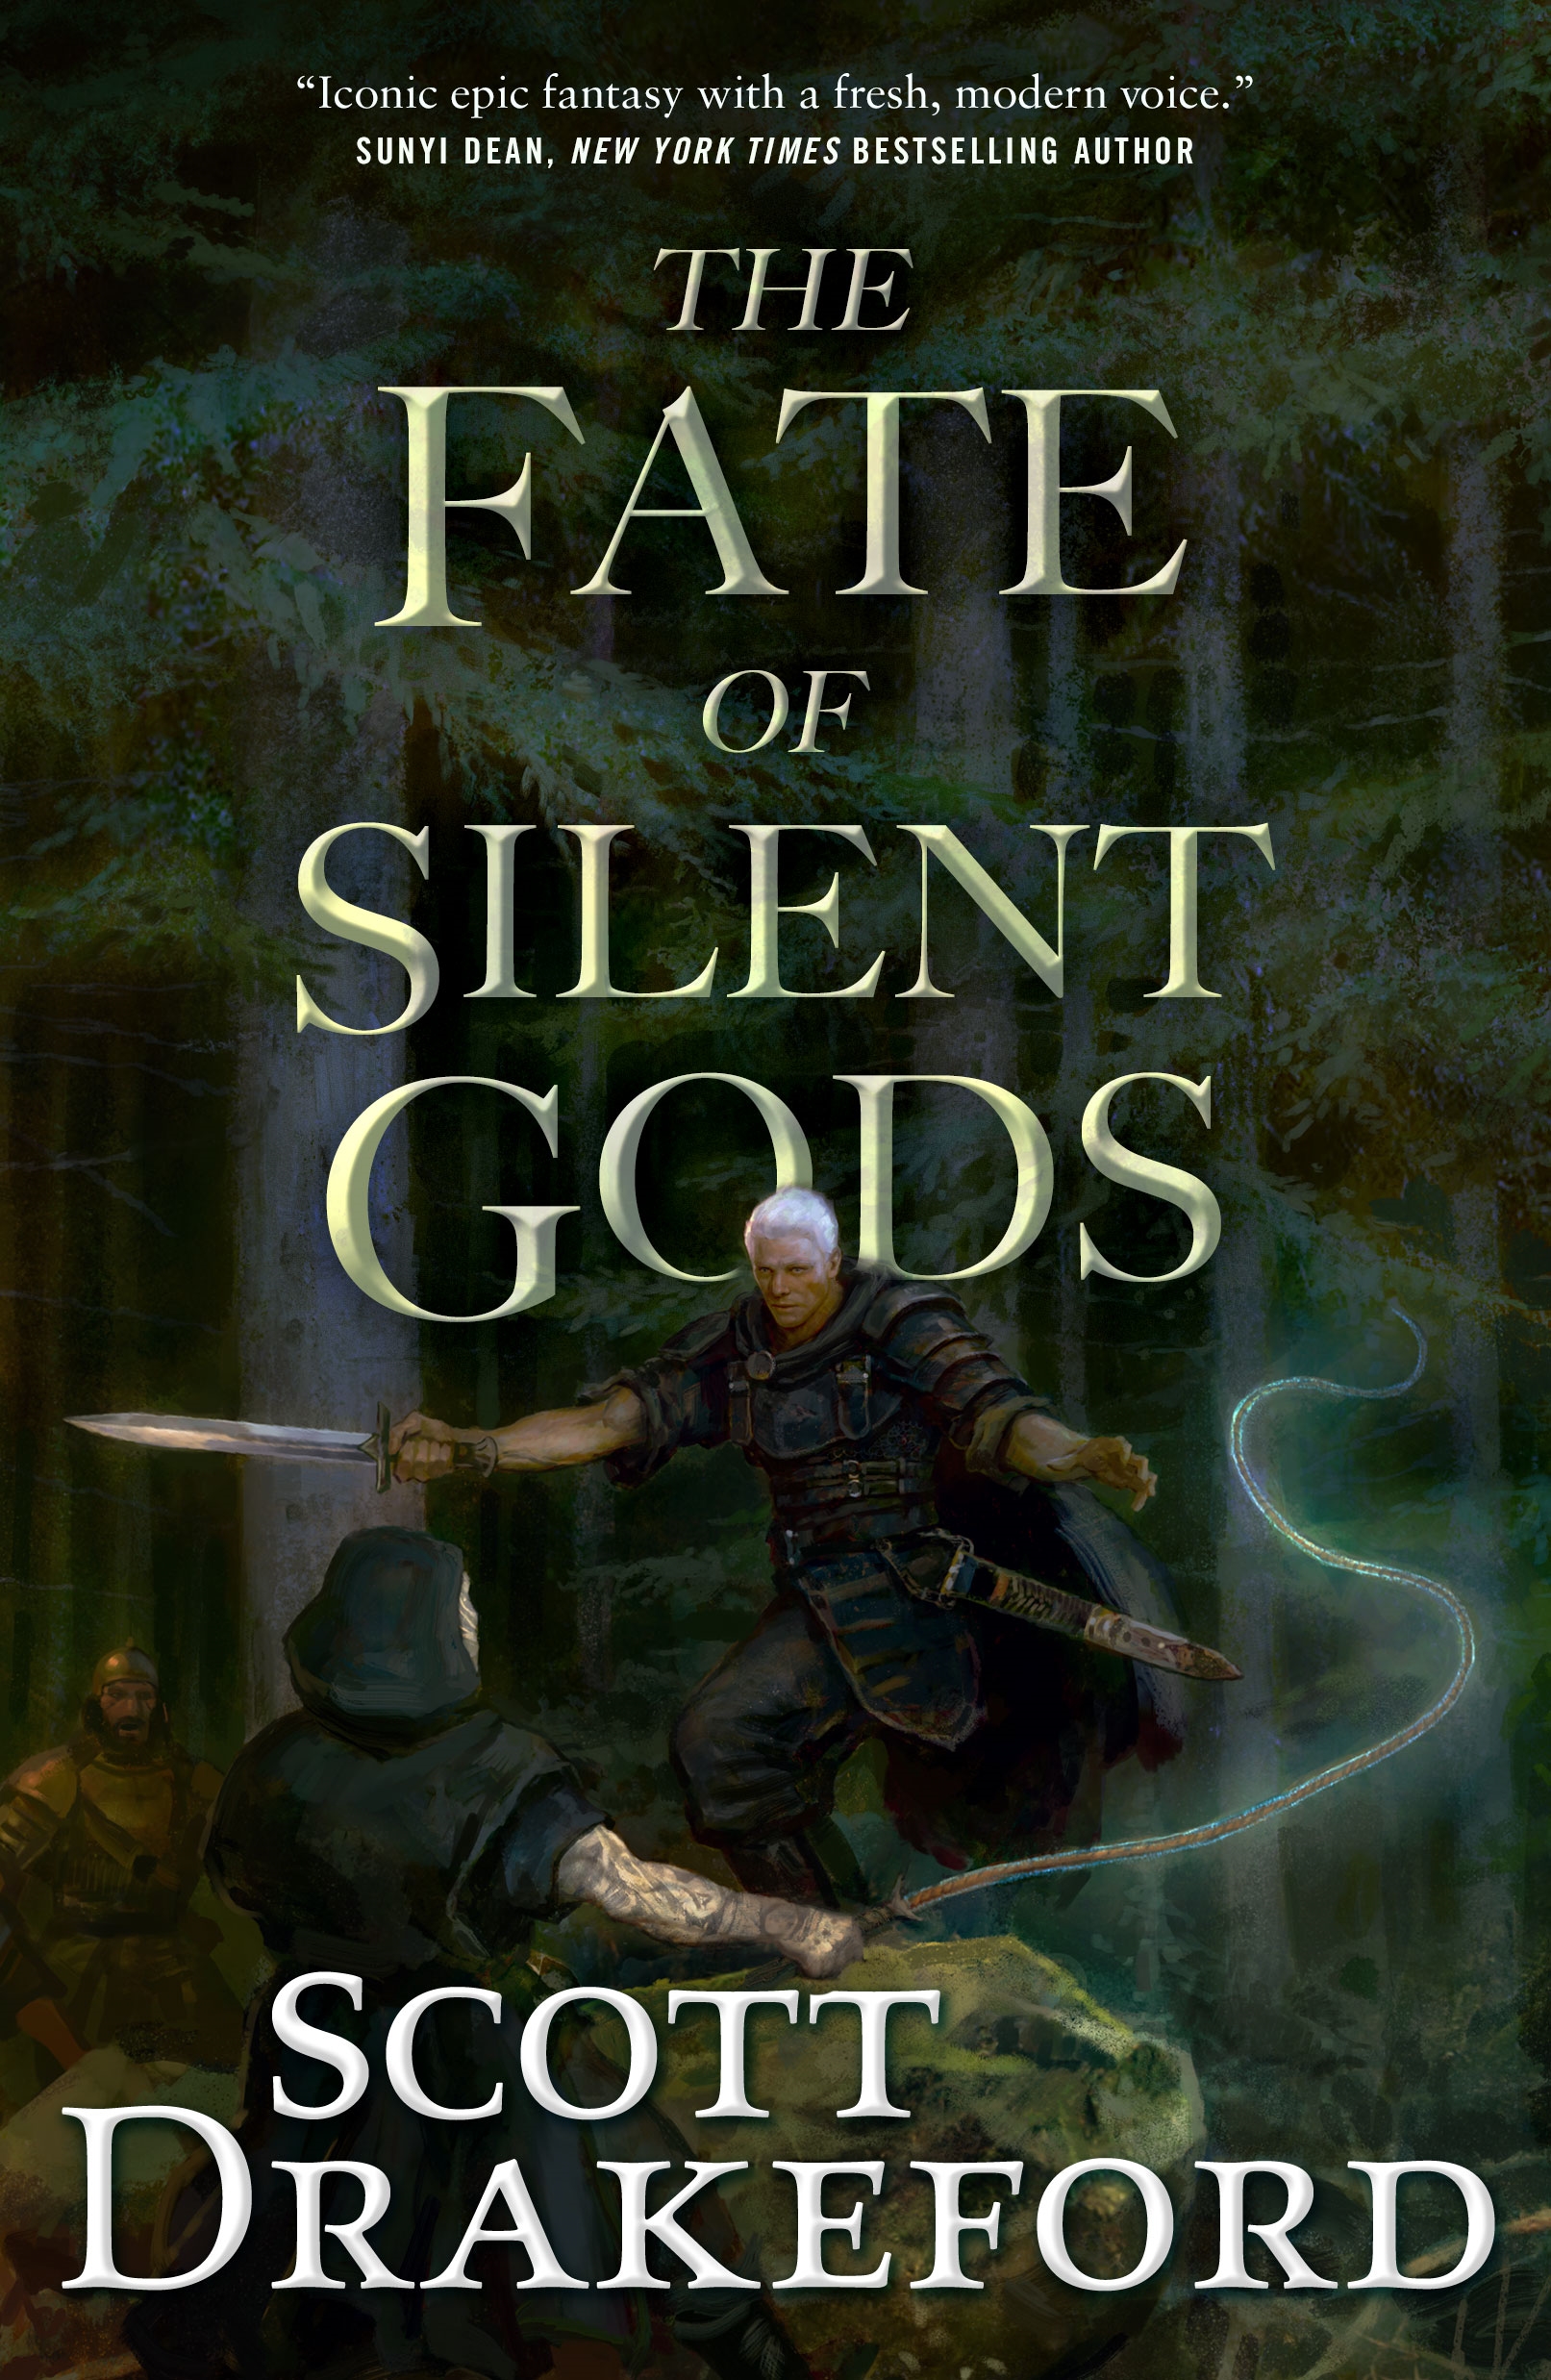 The Fate of Silent Gods by Scott Drakeford